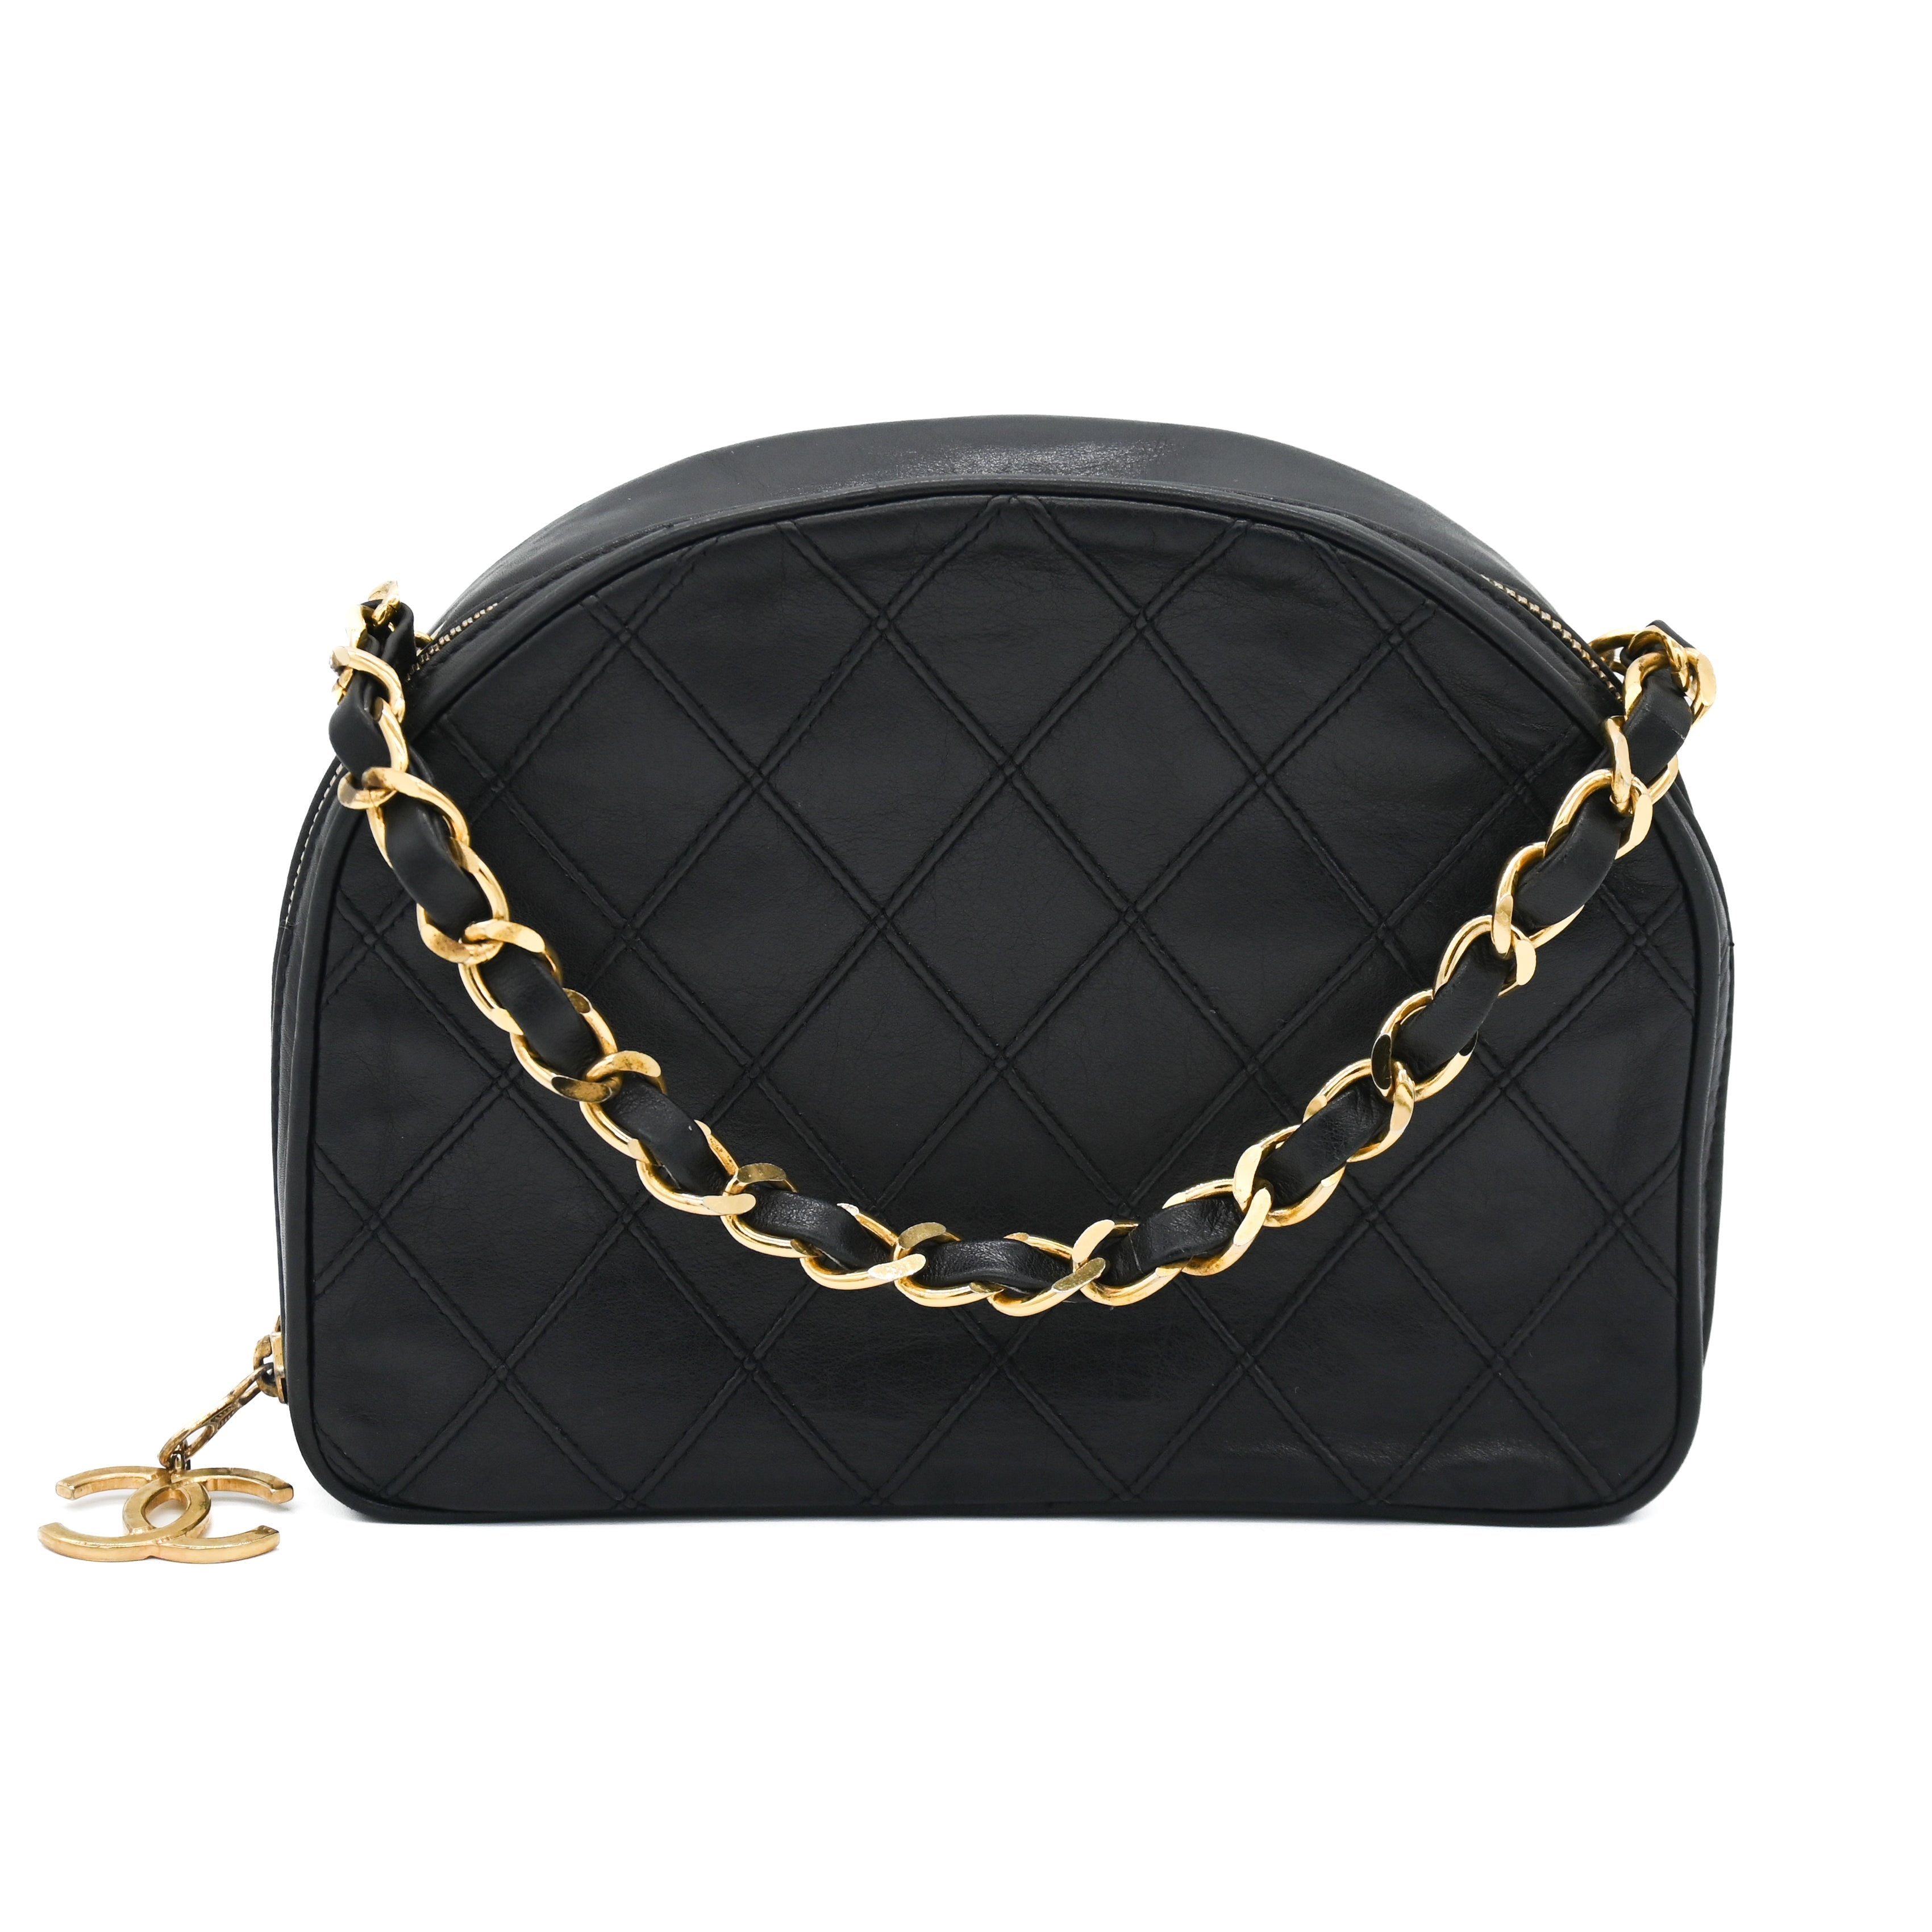 CHANEL Copy of Chanel Vintage Lambskin Timeless Charm Chain Handle Bag - Vault 55